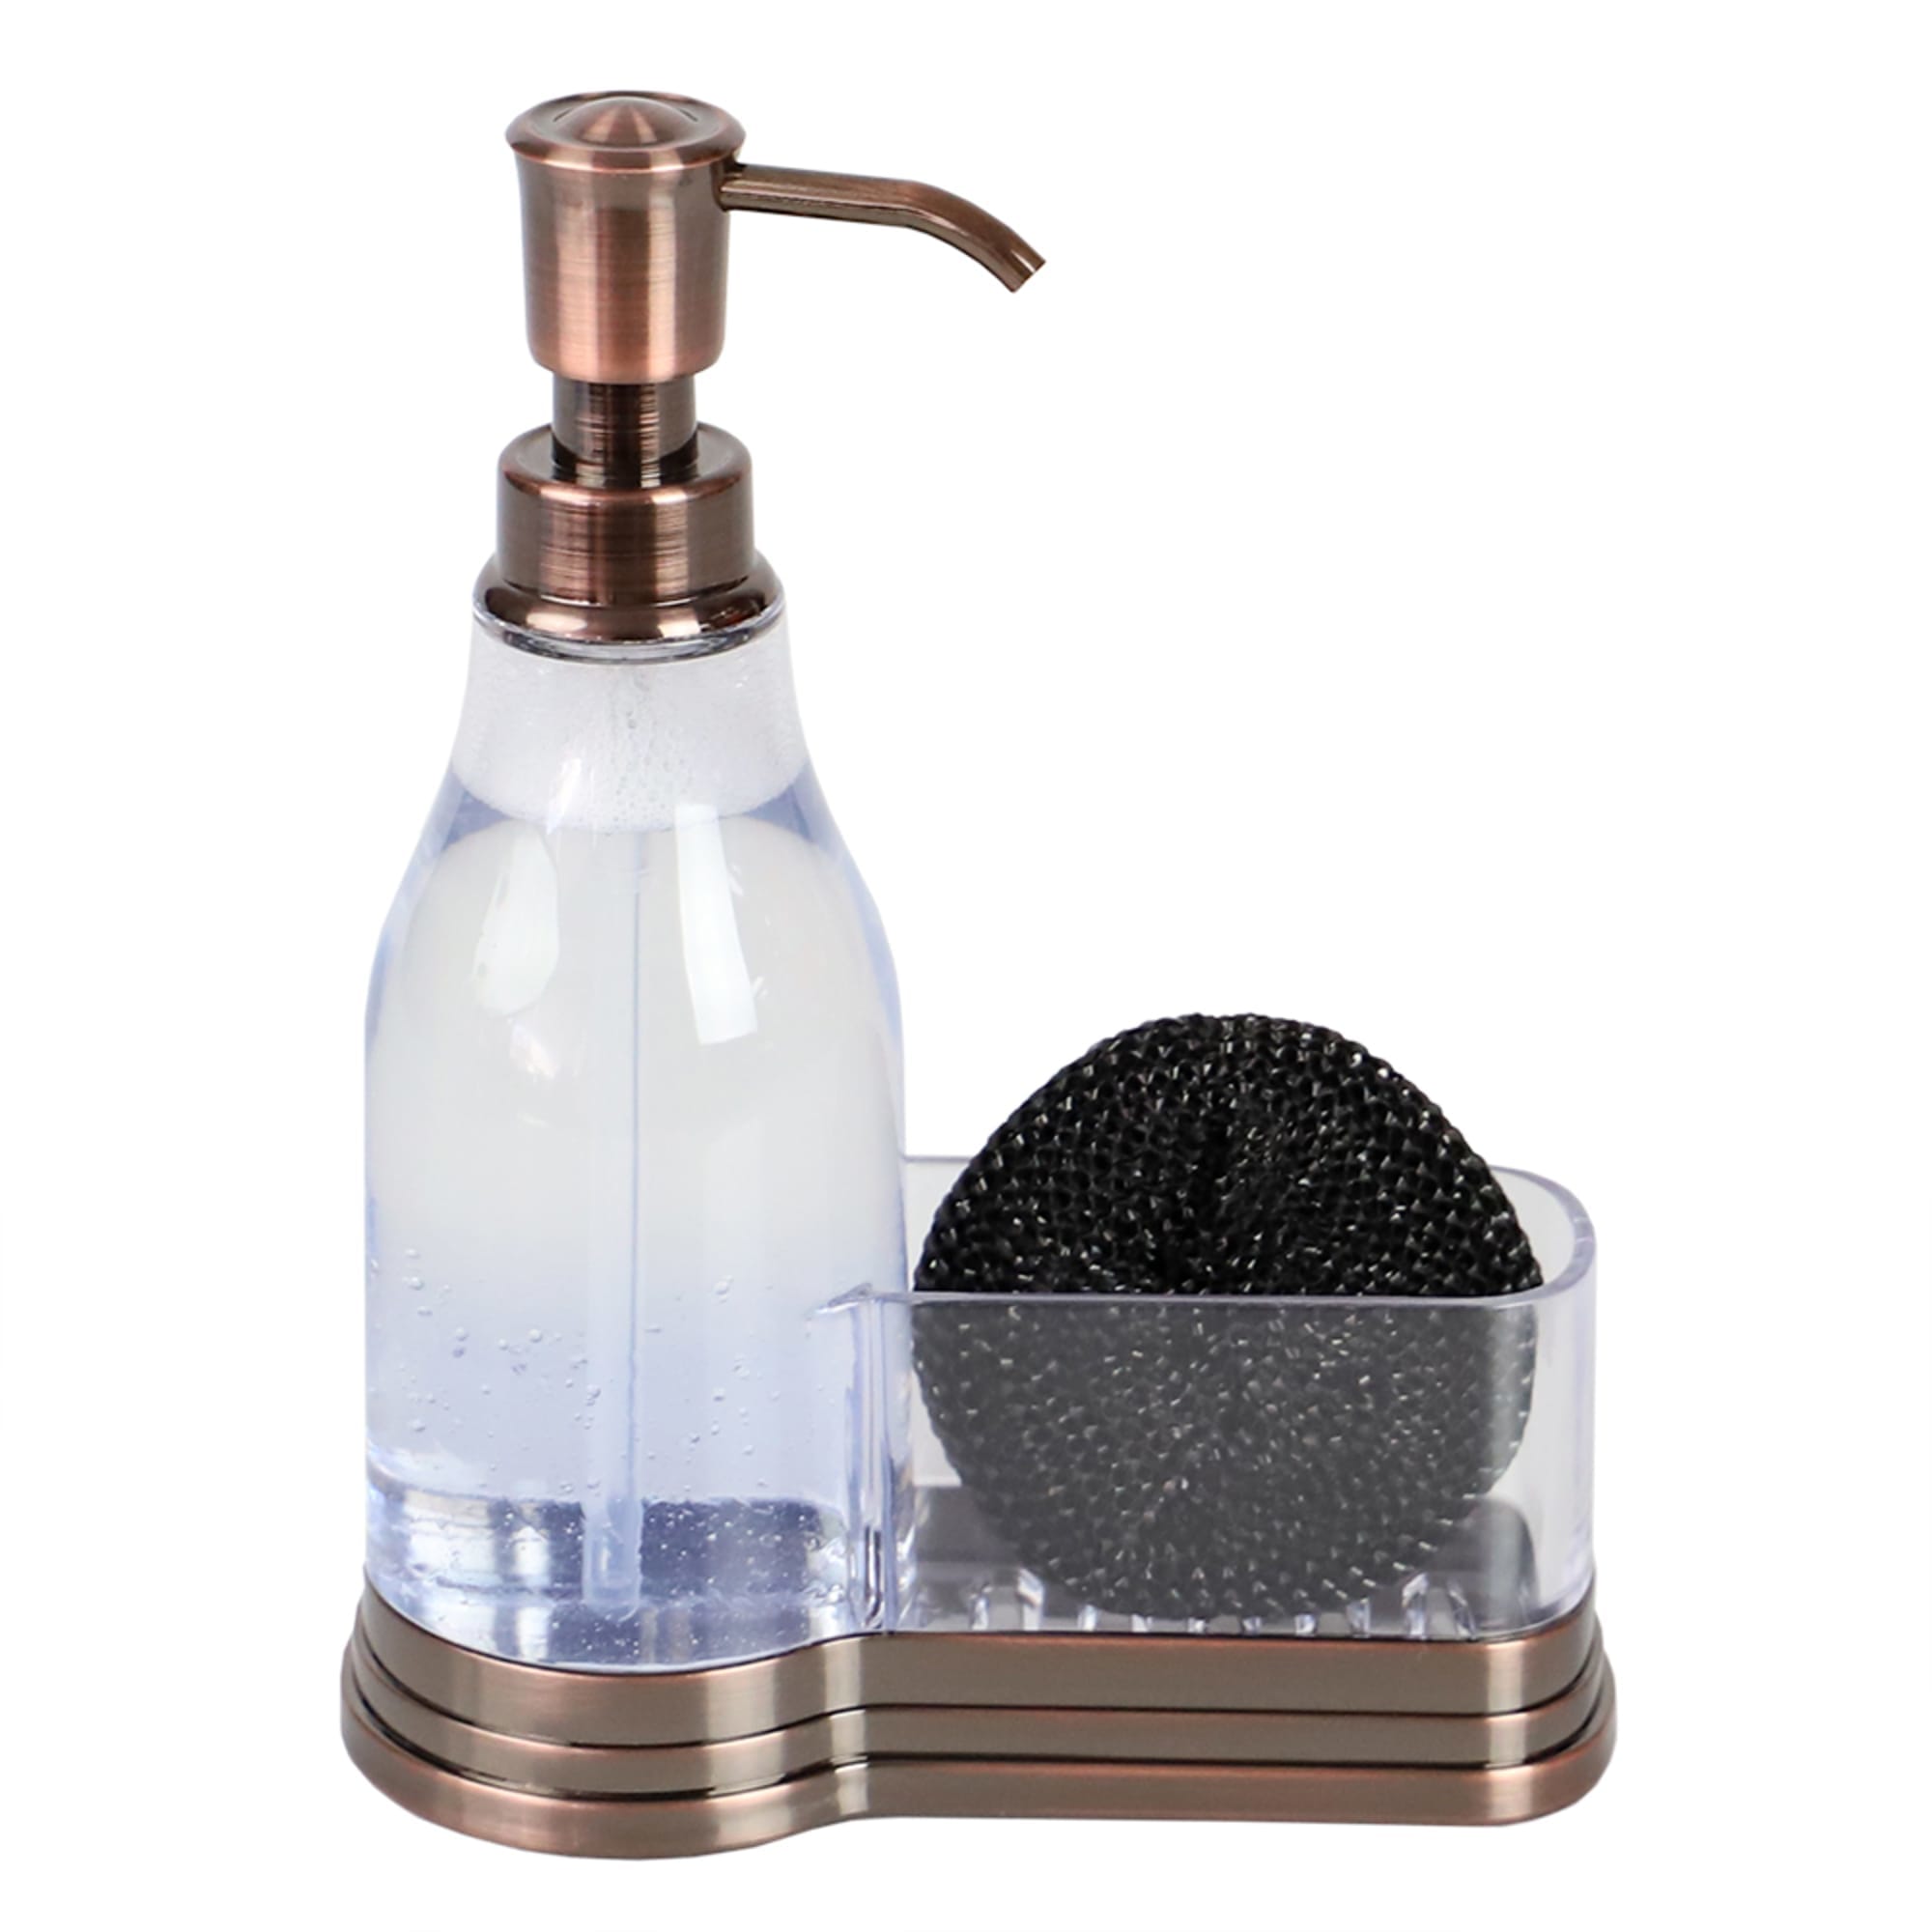 Home Basics Plastic Soap Dispenser with Brushed Steel Top  and Fixed Sponge Holder, Bronze $6.00 EACH, CASE PACK OF 12